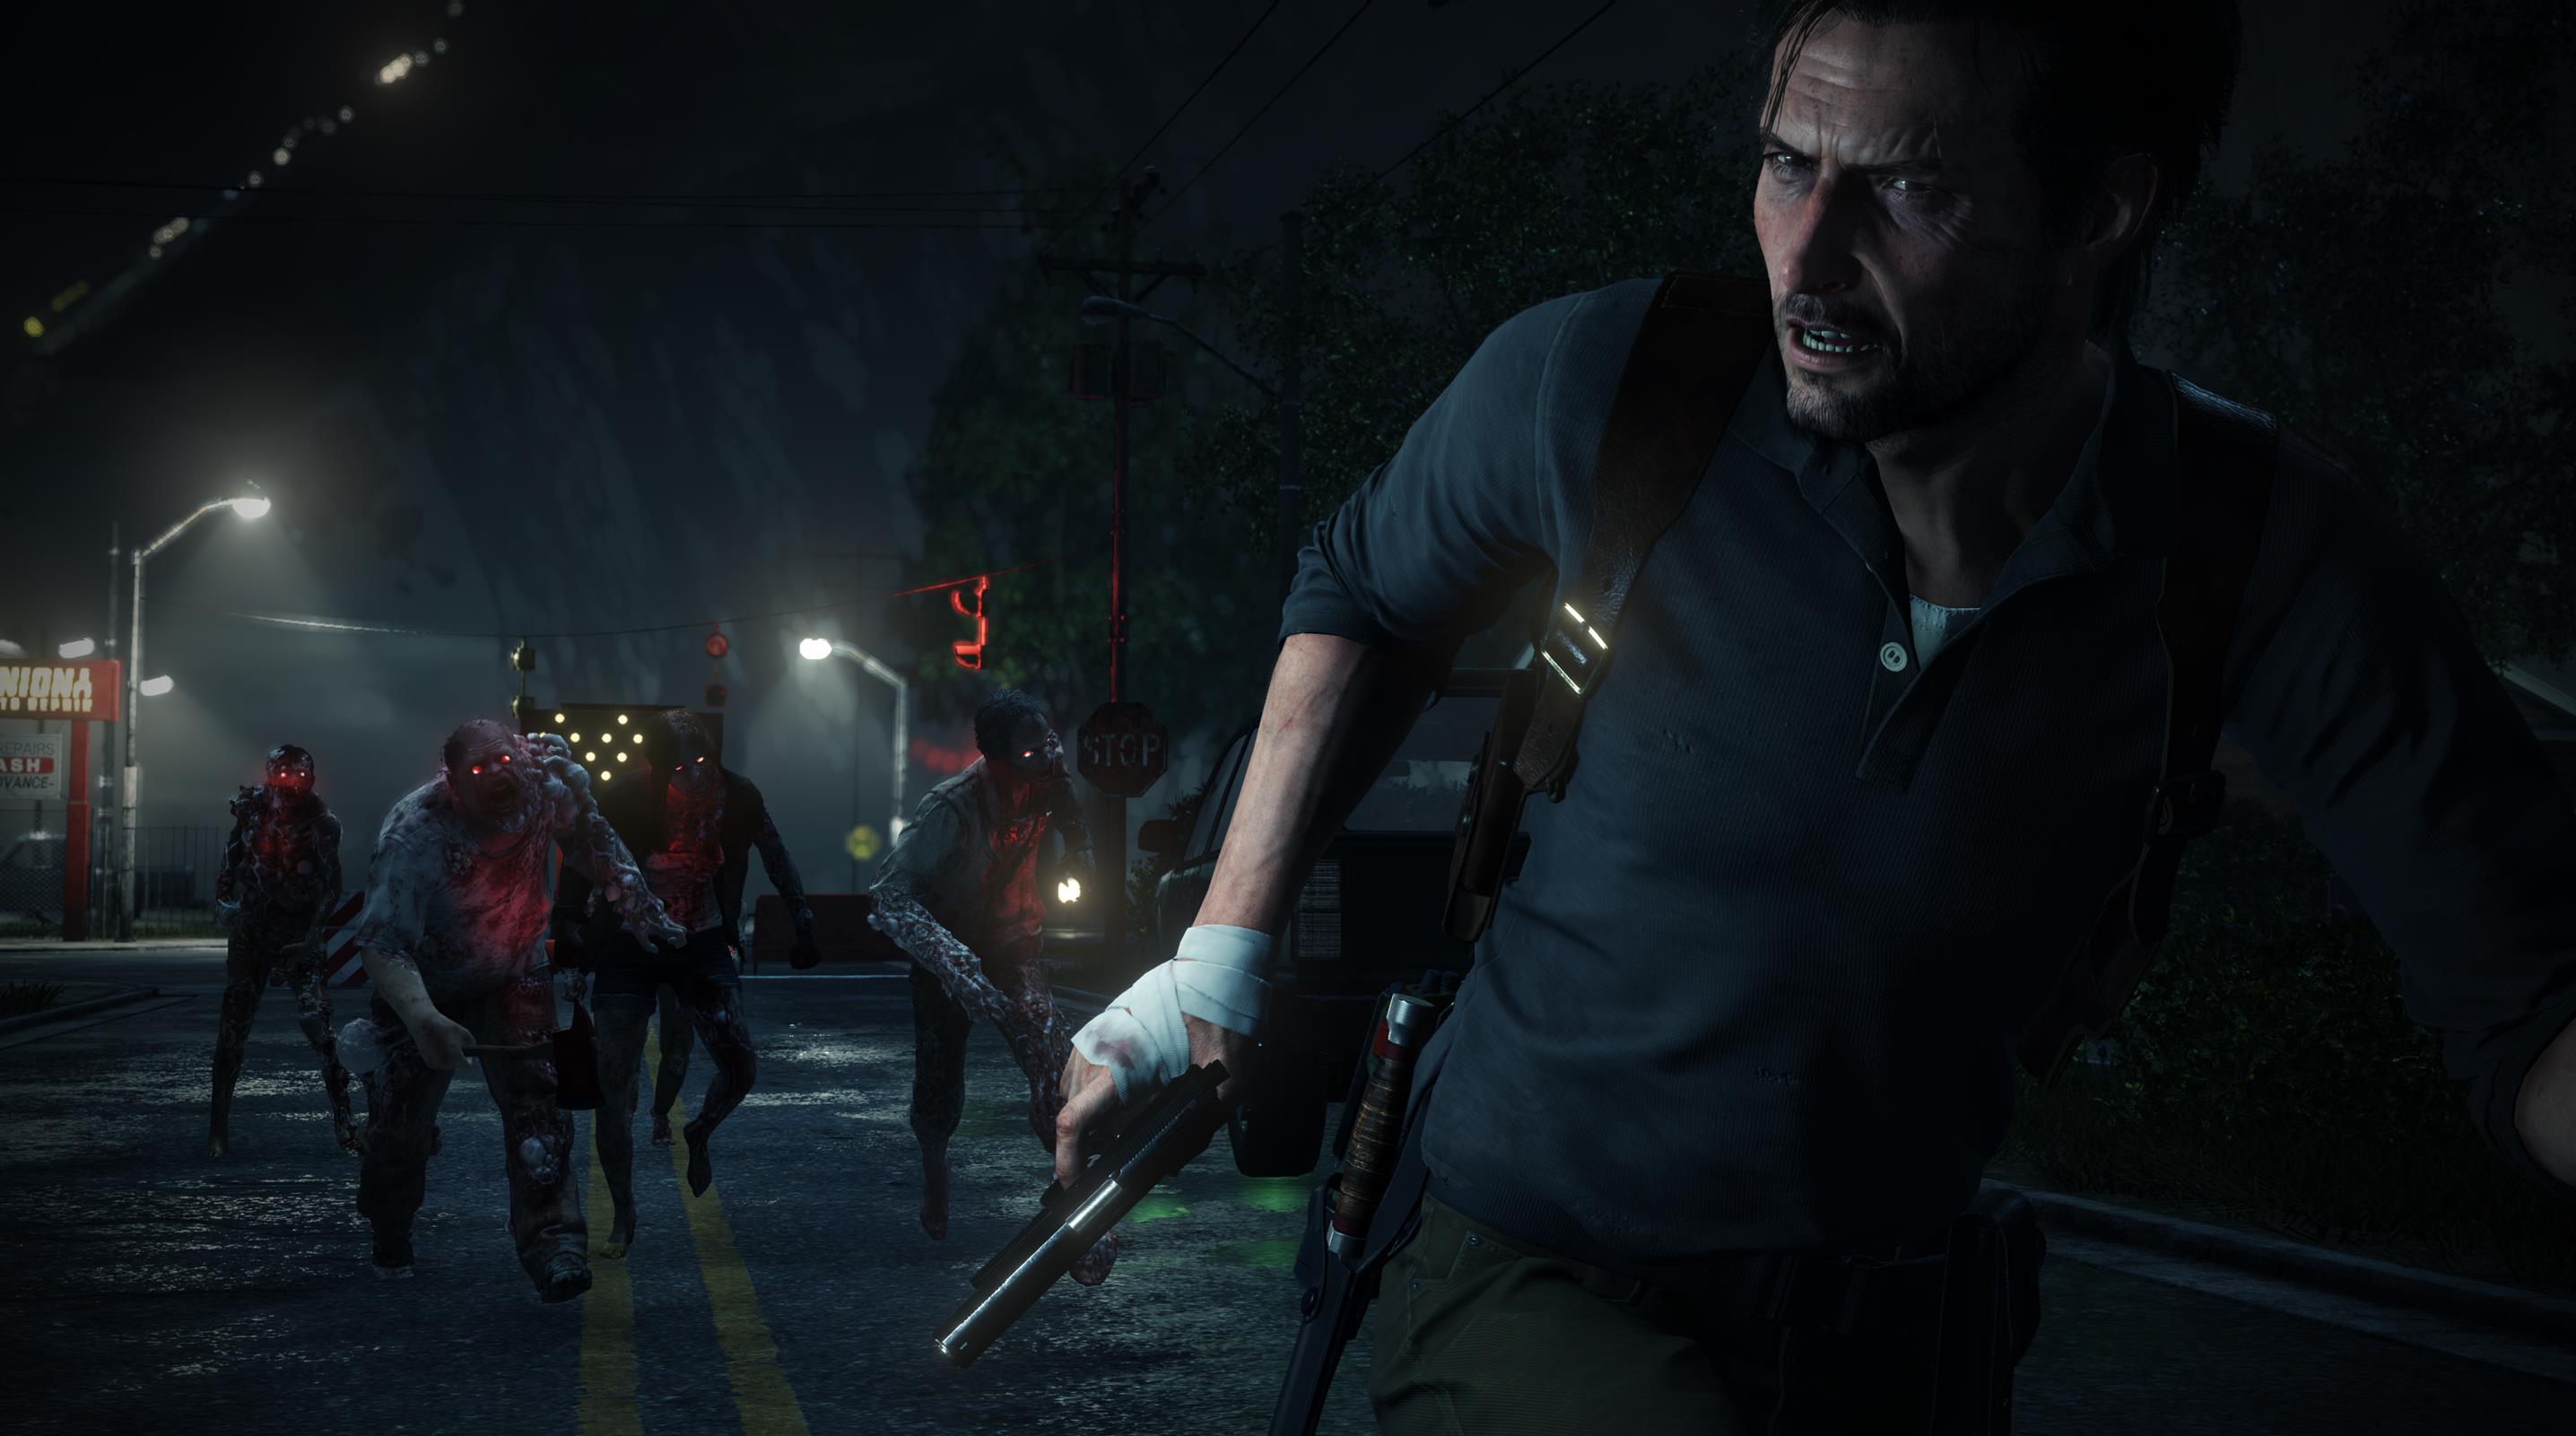 Get ready to face ‘The Evil Within’ once again